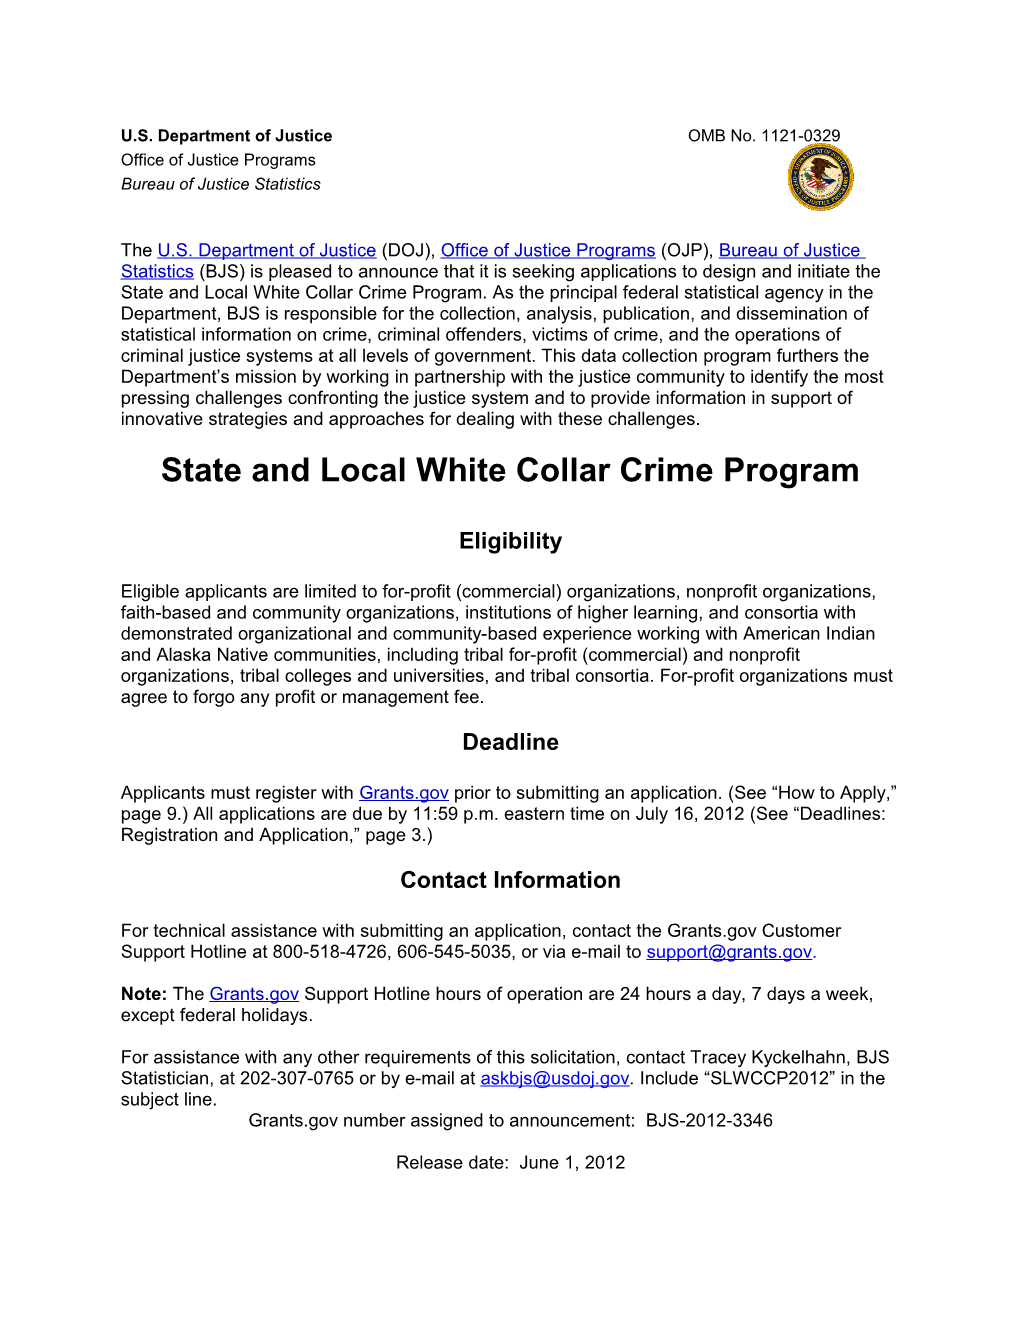 The Department Of Justice’S Bureau Of Justice Statistics (BJS) Is Pleased To Announce That It Is Seeking Applications For The State Justice Statistics Program For